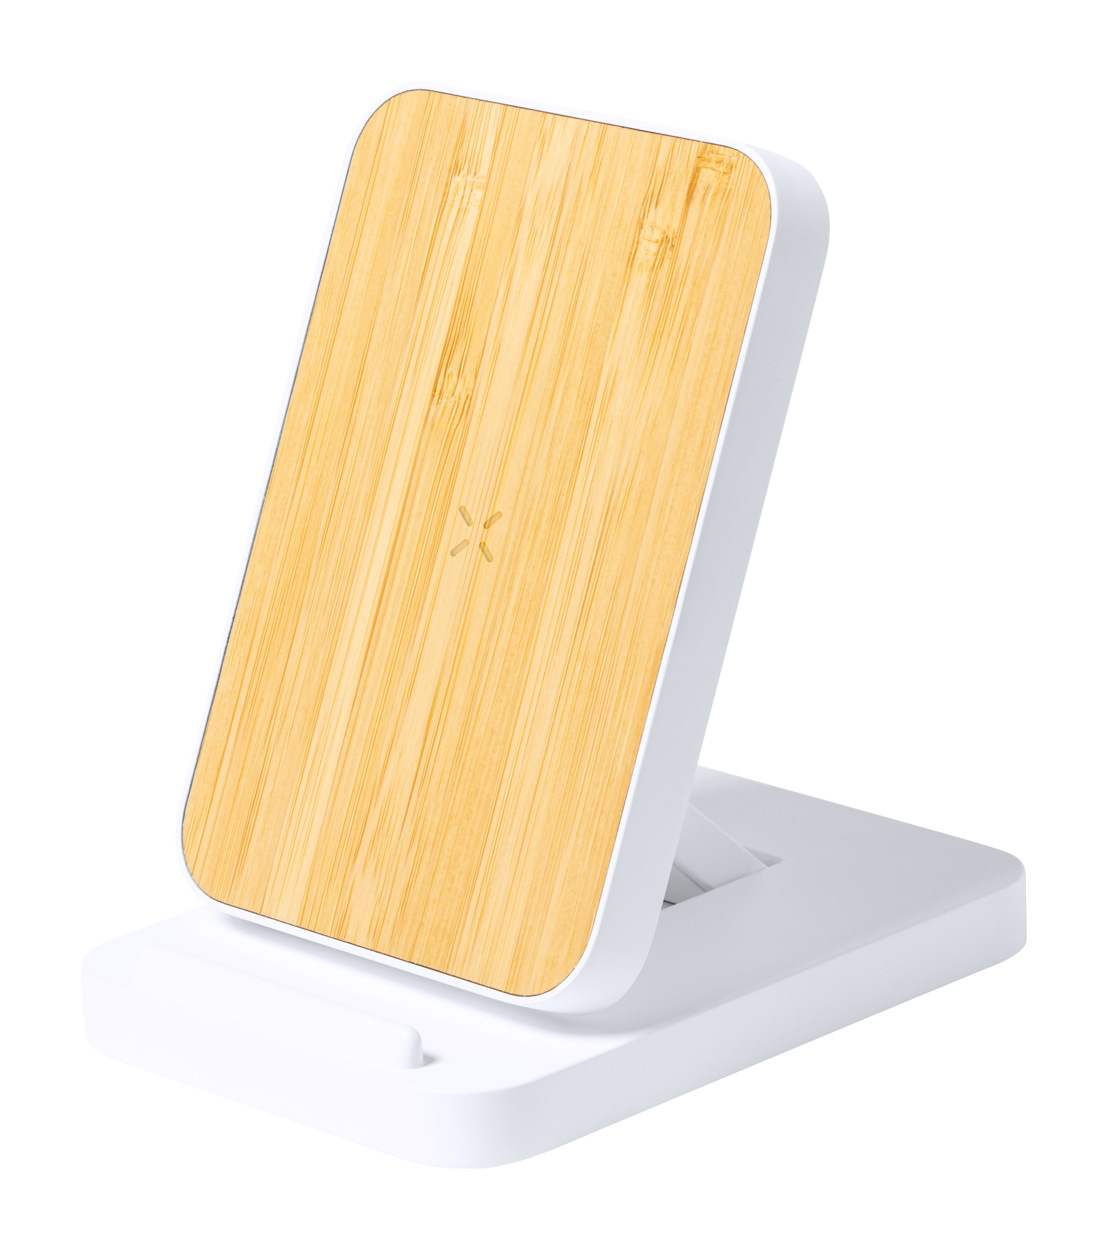 Meller mobile phone stand with wireless charger - beige